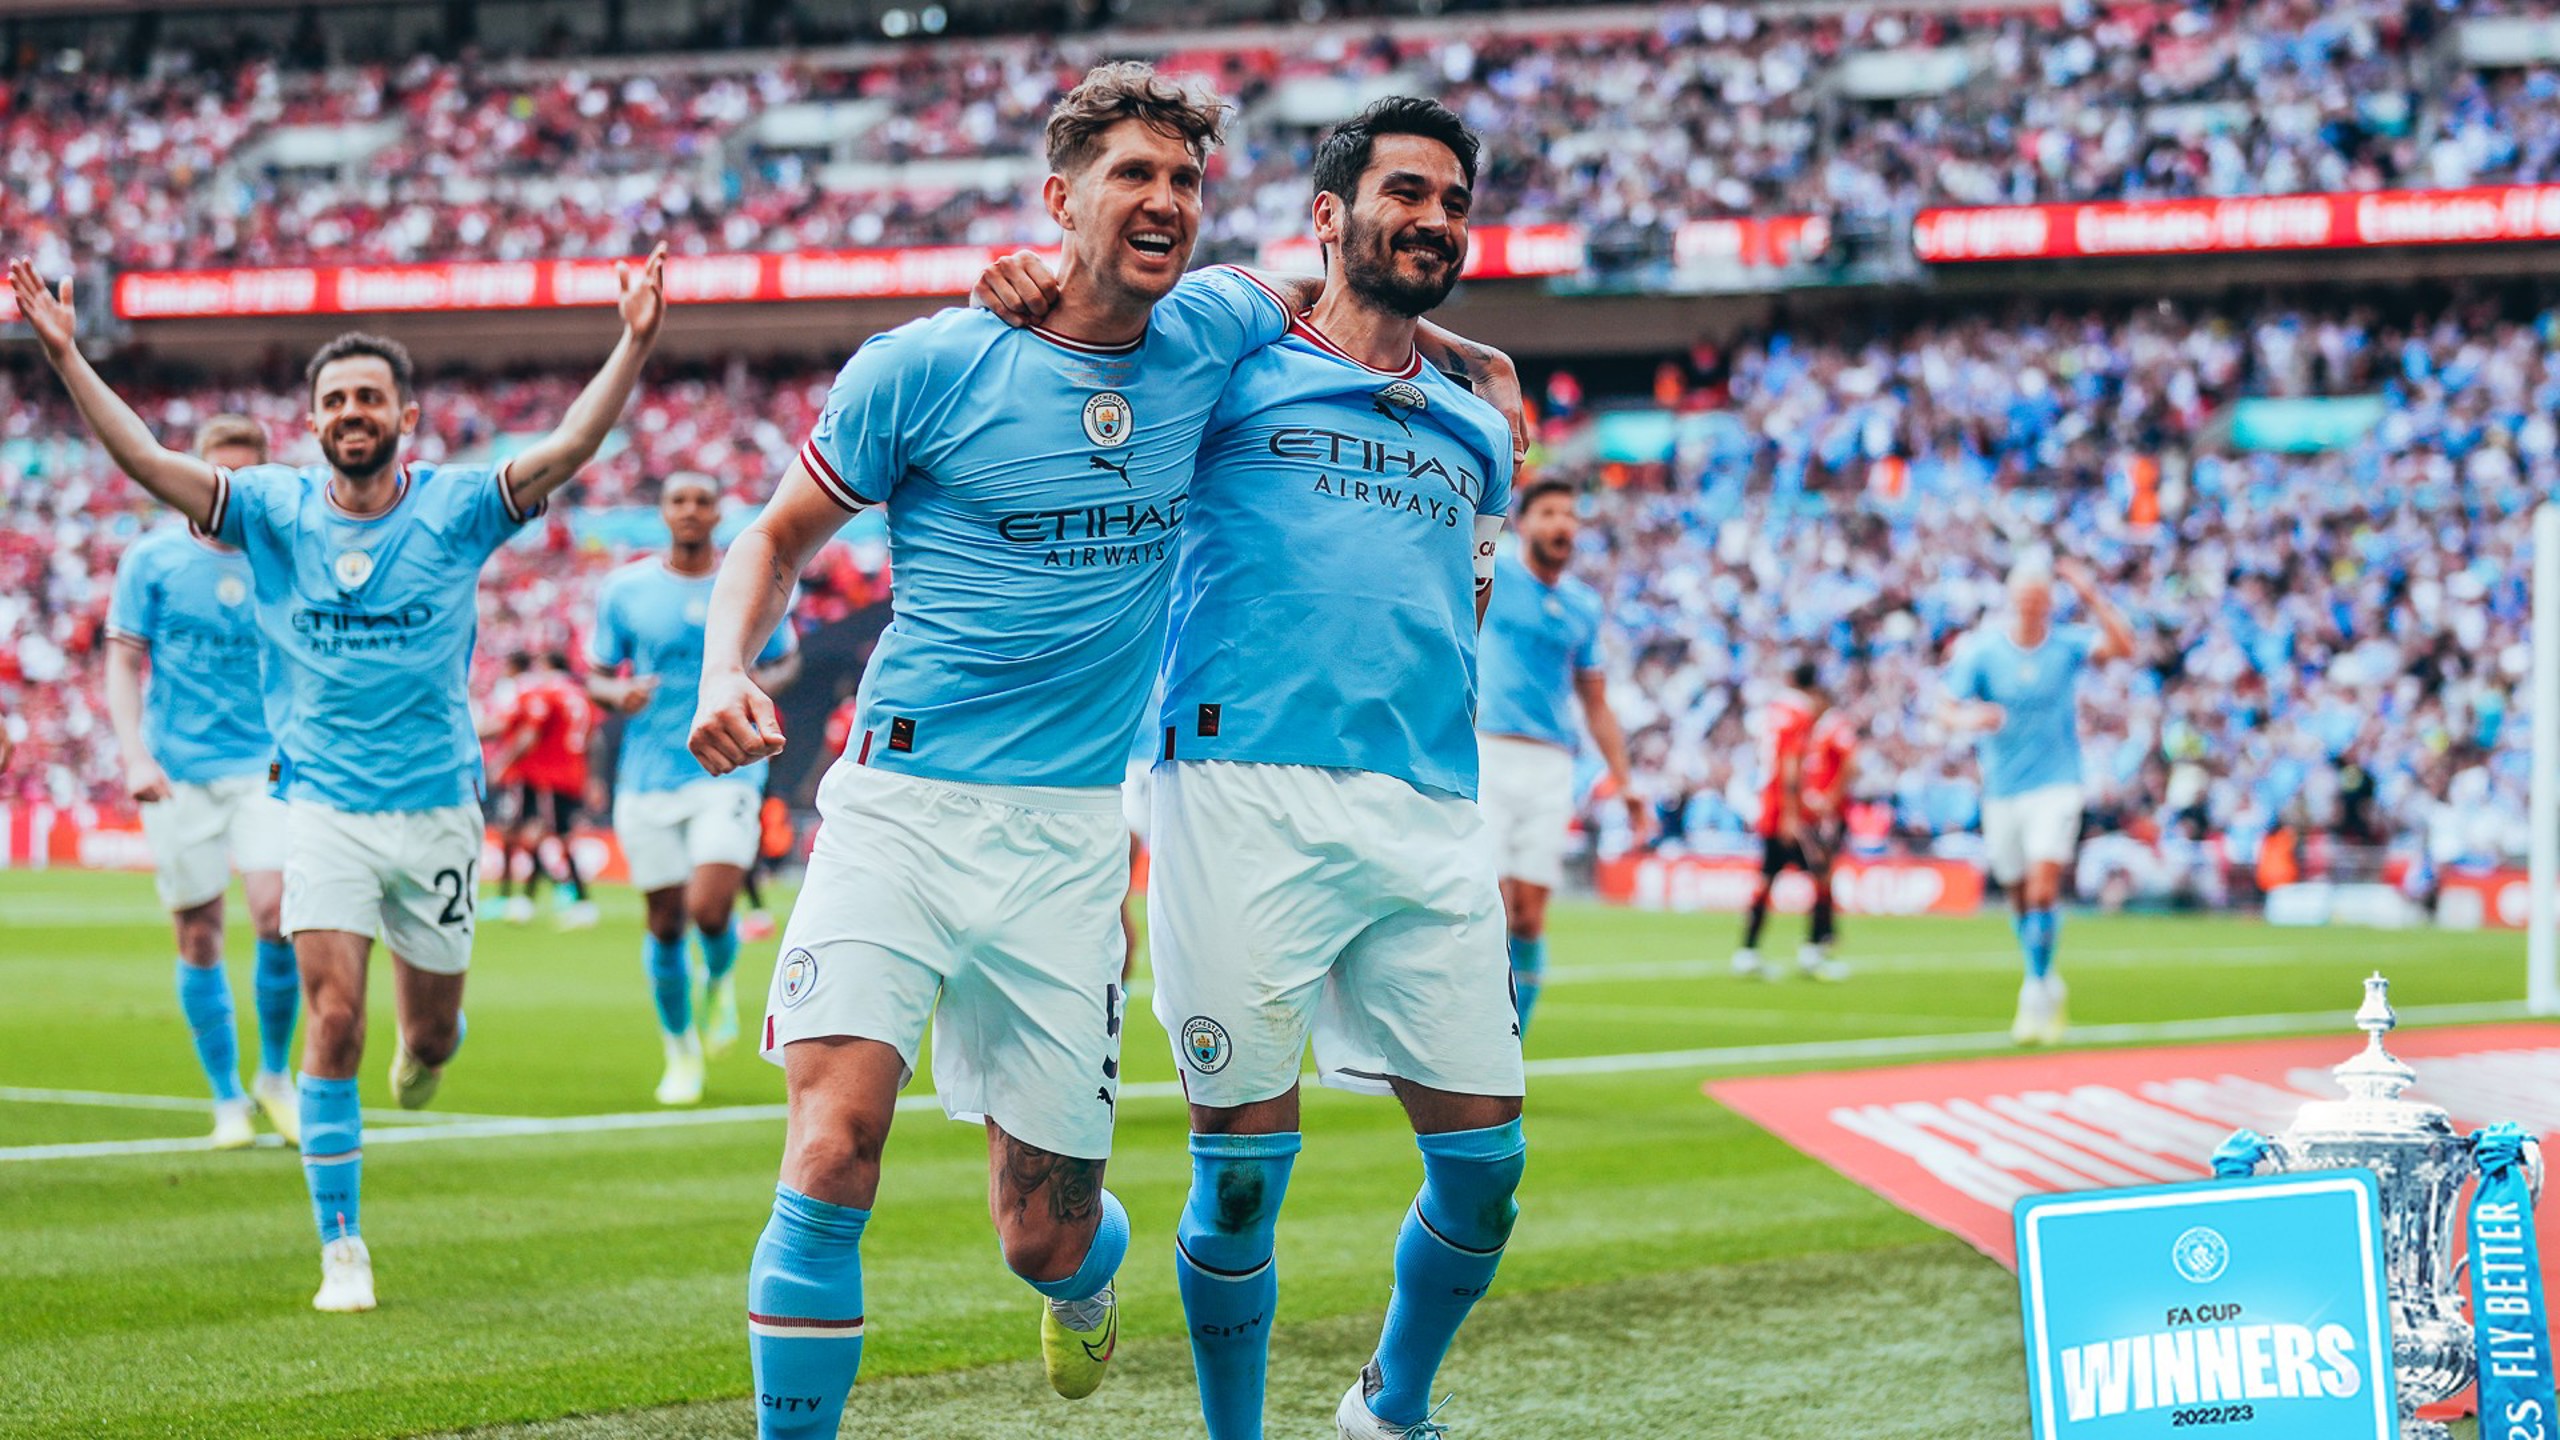 Gundogan brace fires City to FA Cup final glory and the domestic Double